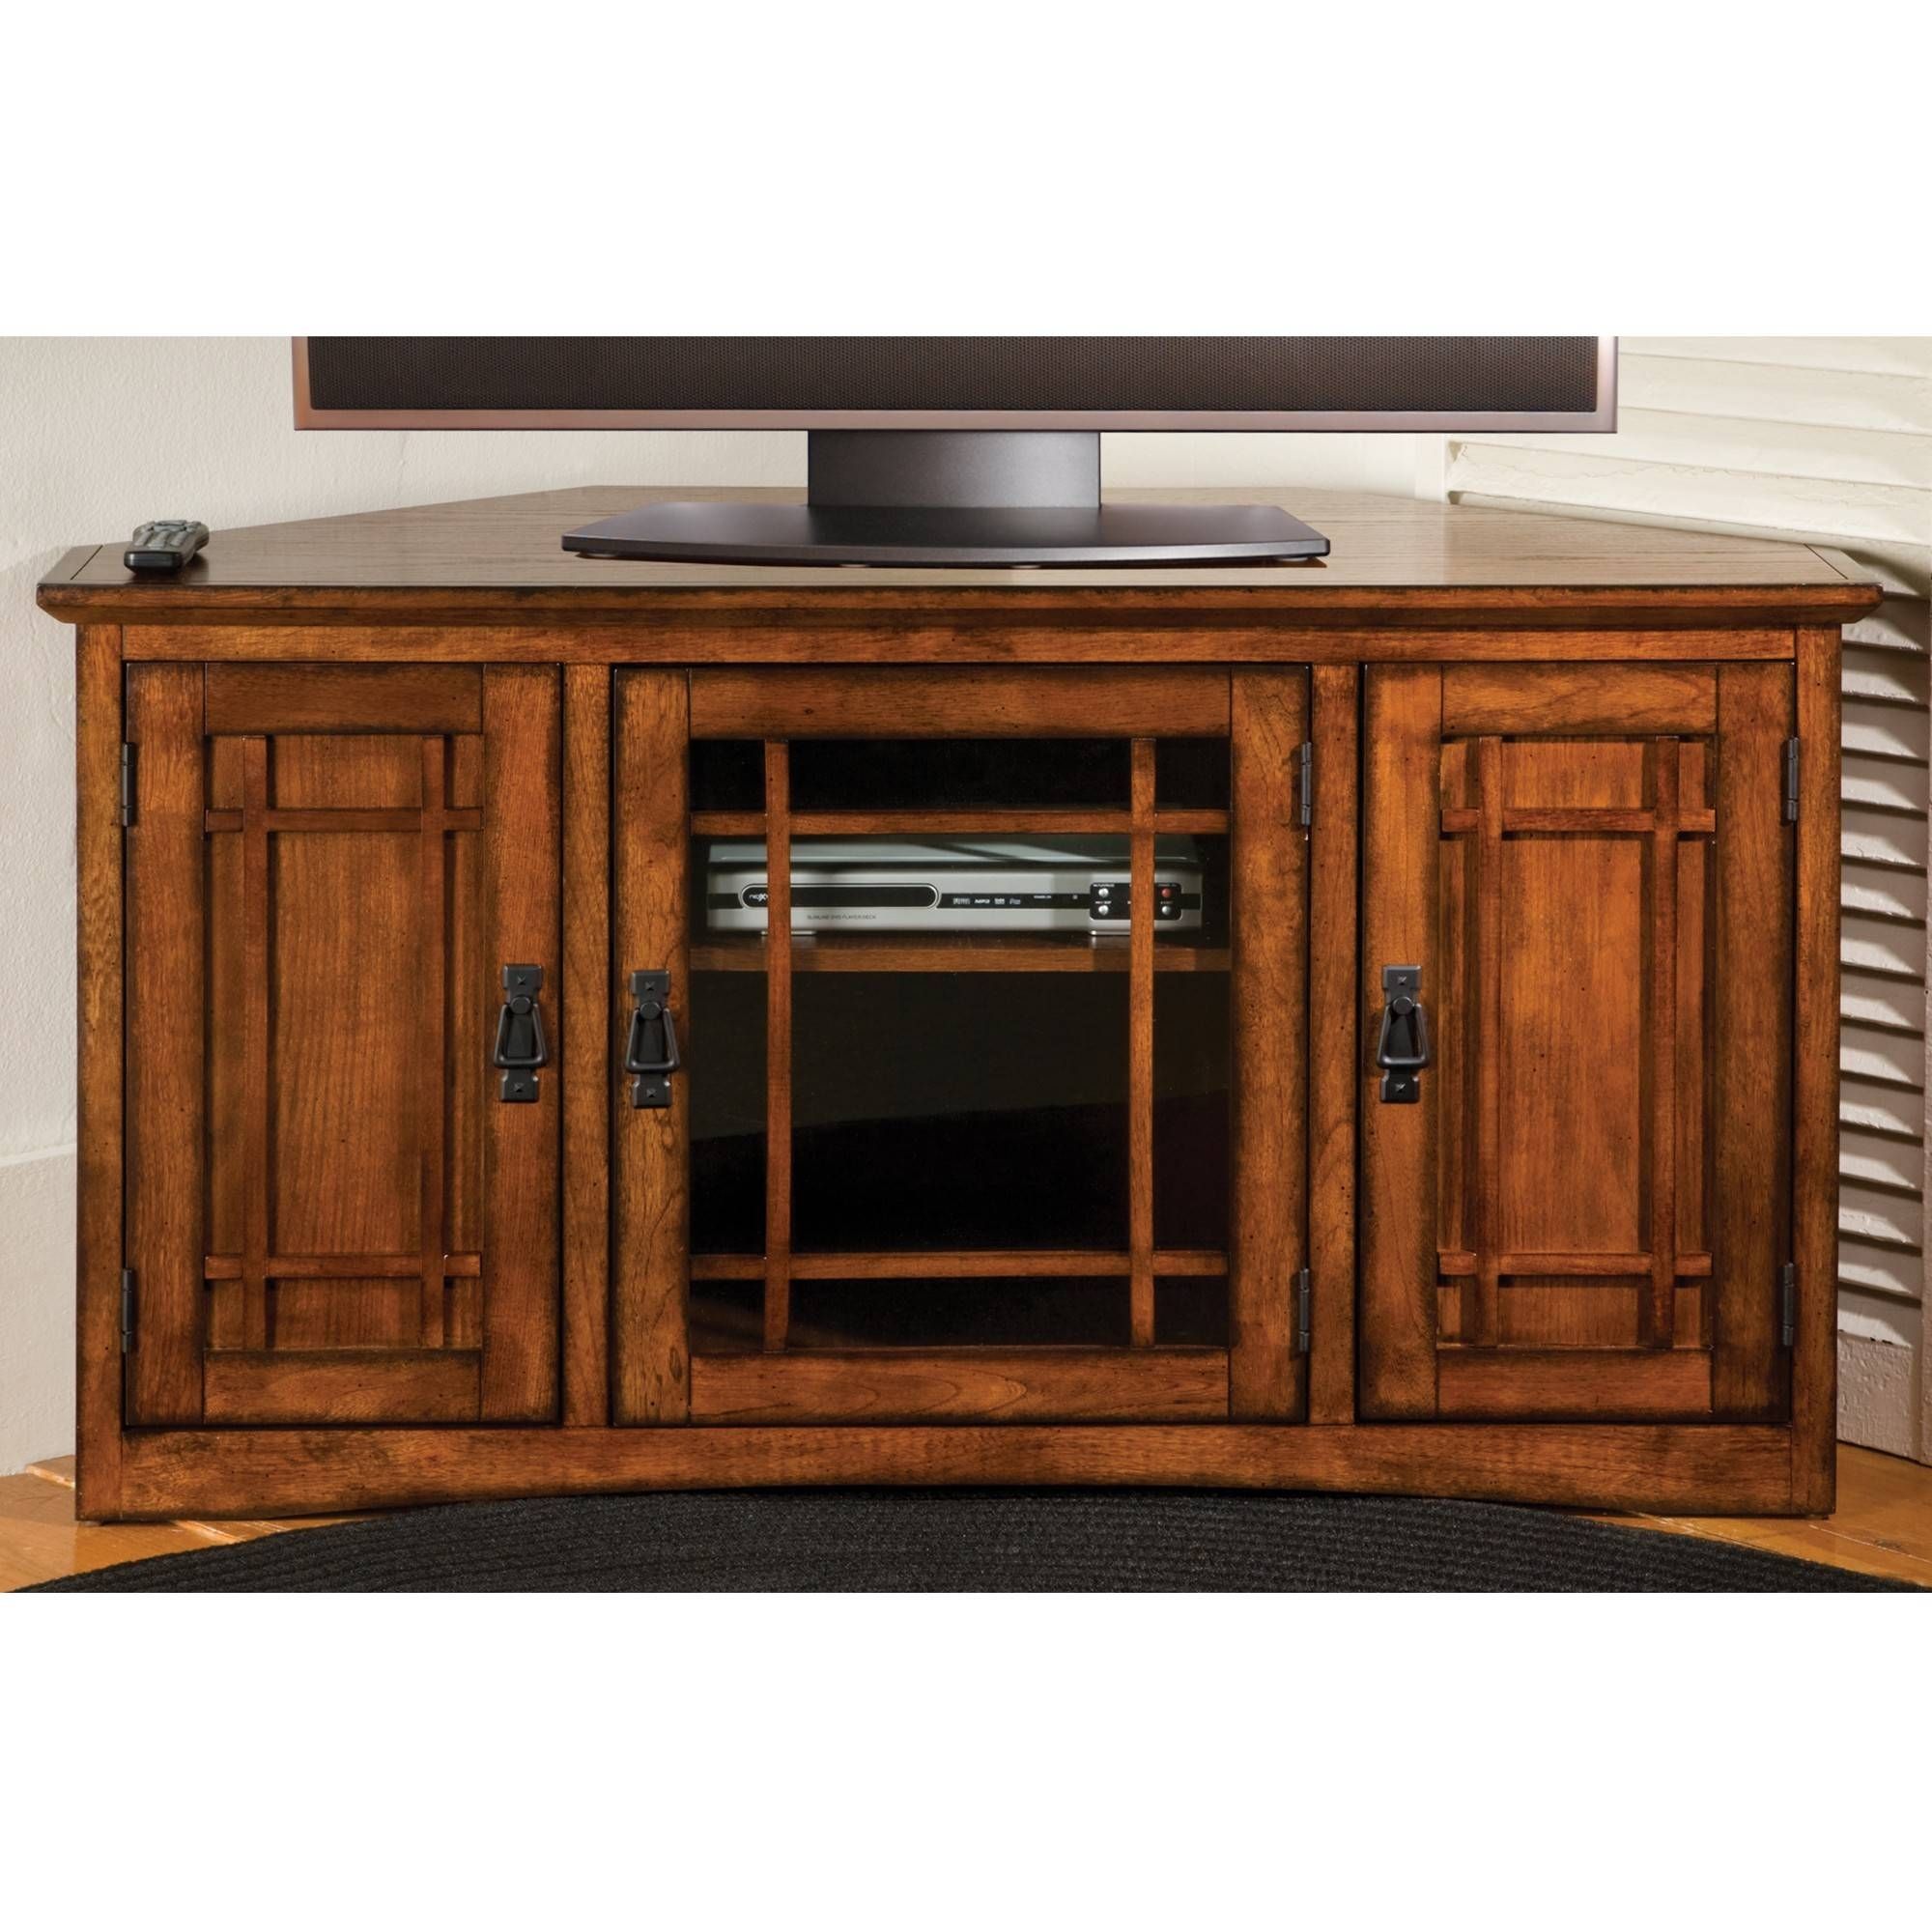 Mission Corner Tv Cabinet | Sturbridge Yankee Workshop Pertaining To Glass Tv Cabinets With Doors (View 14 of 15)